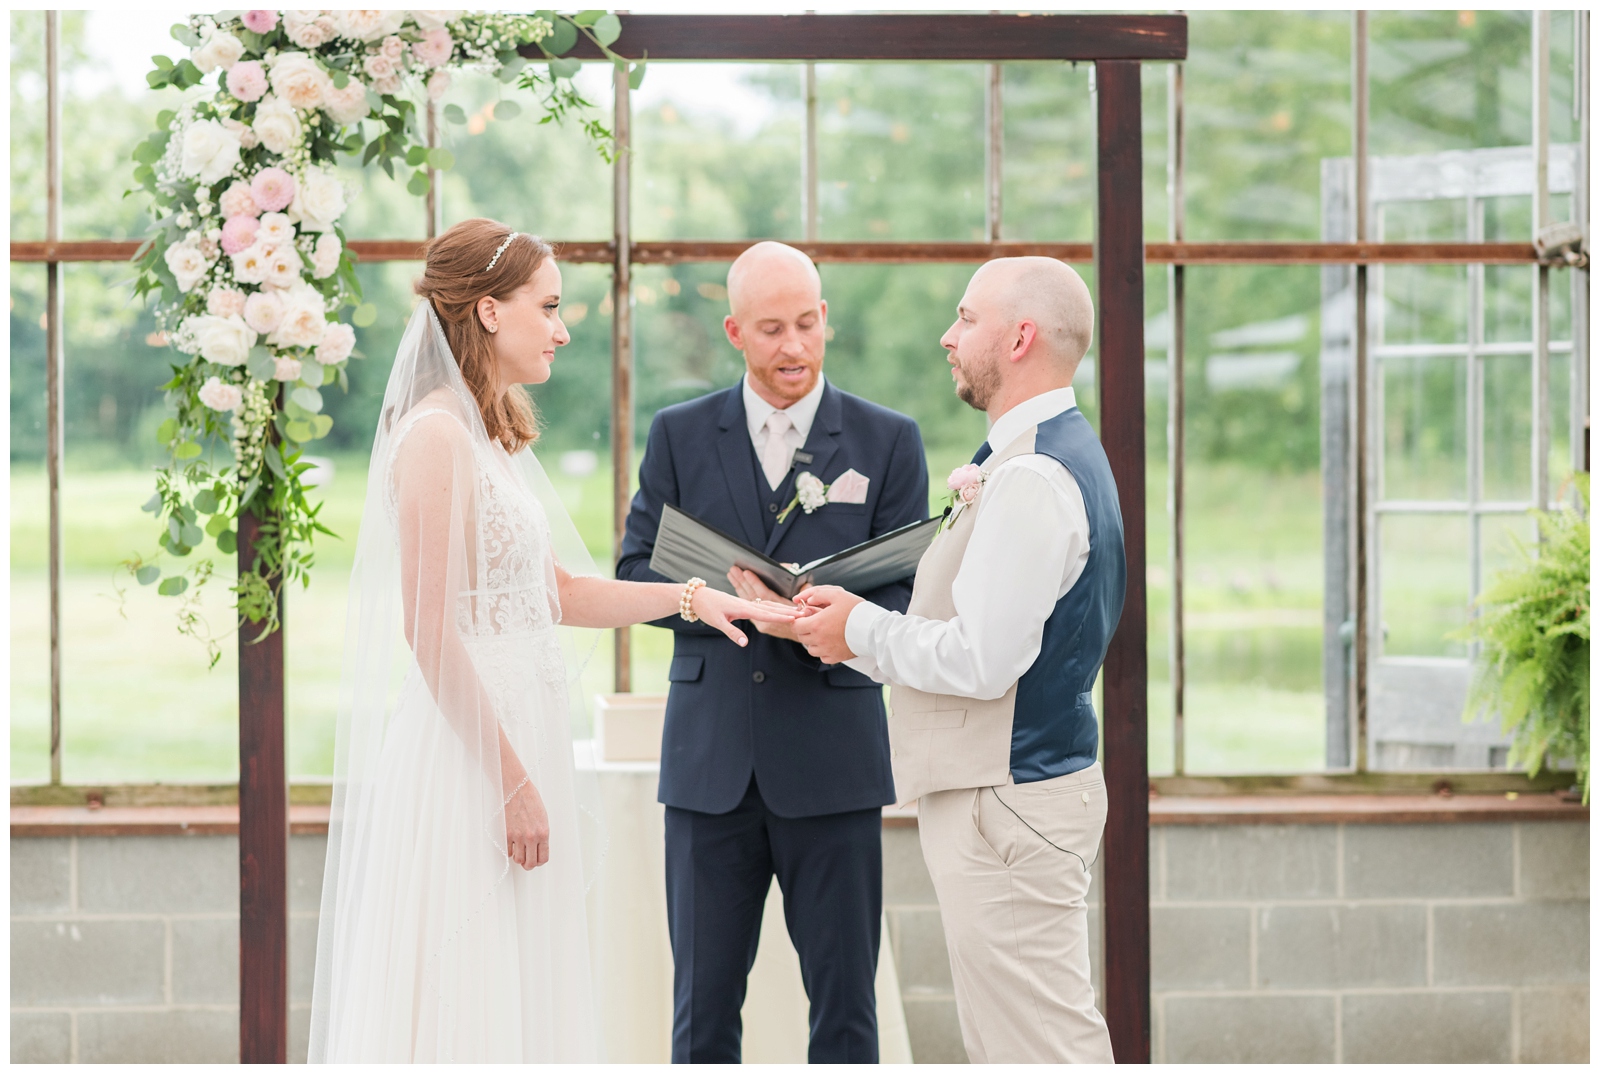 bride and groom exchange rings during wedding ceremony at Oak Grove Jorgensen Farms